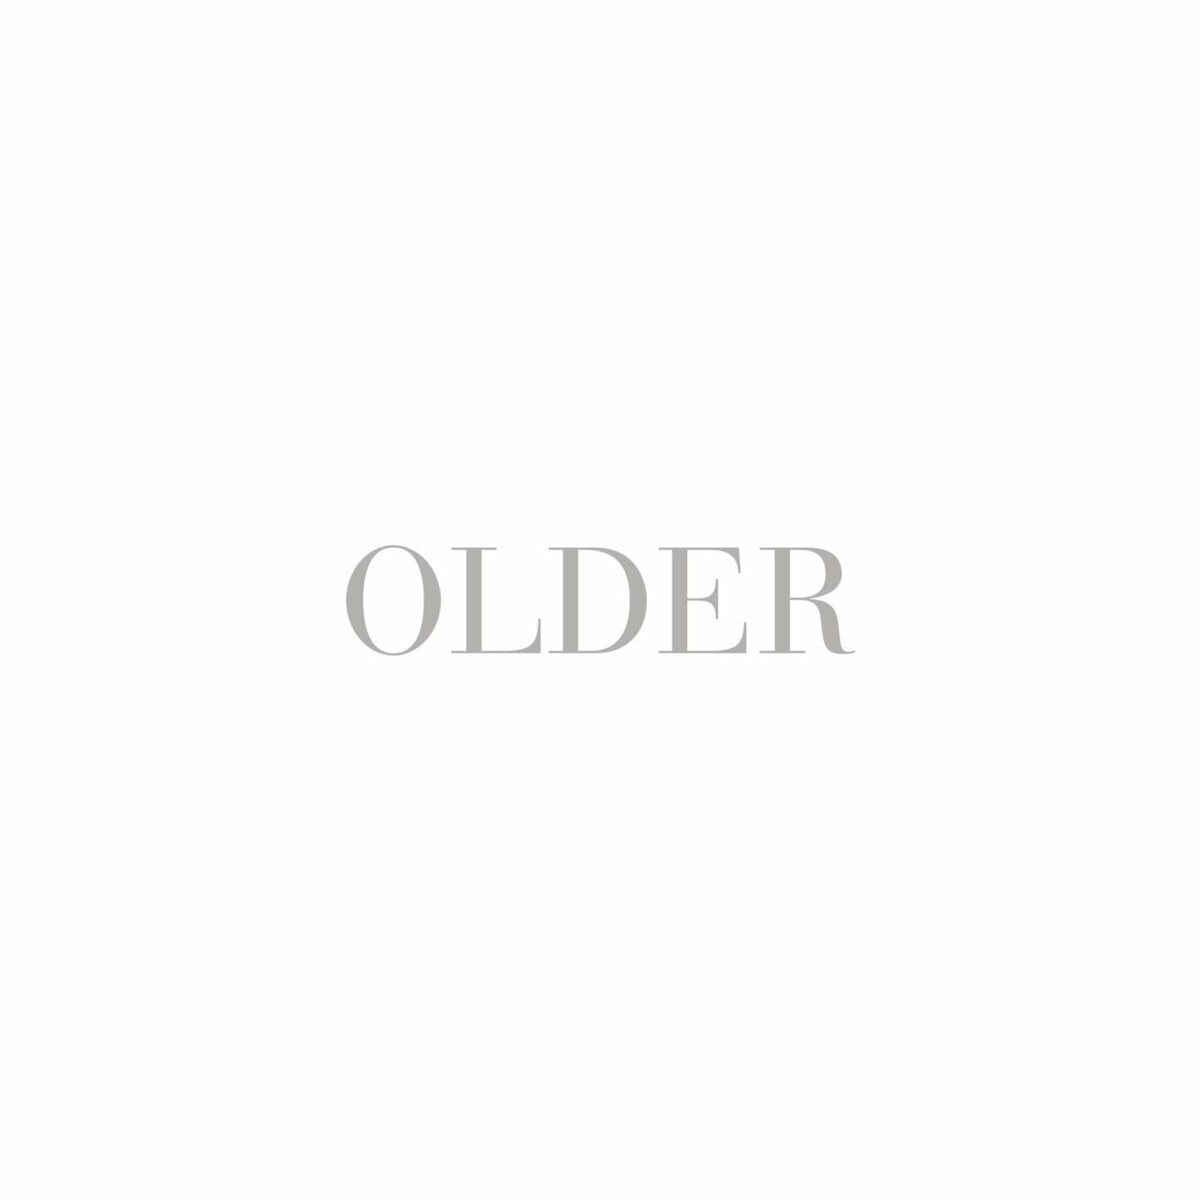 George Michael - Older (Expanded Edition) (2022) FLAC + MP3